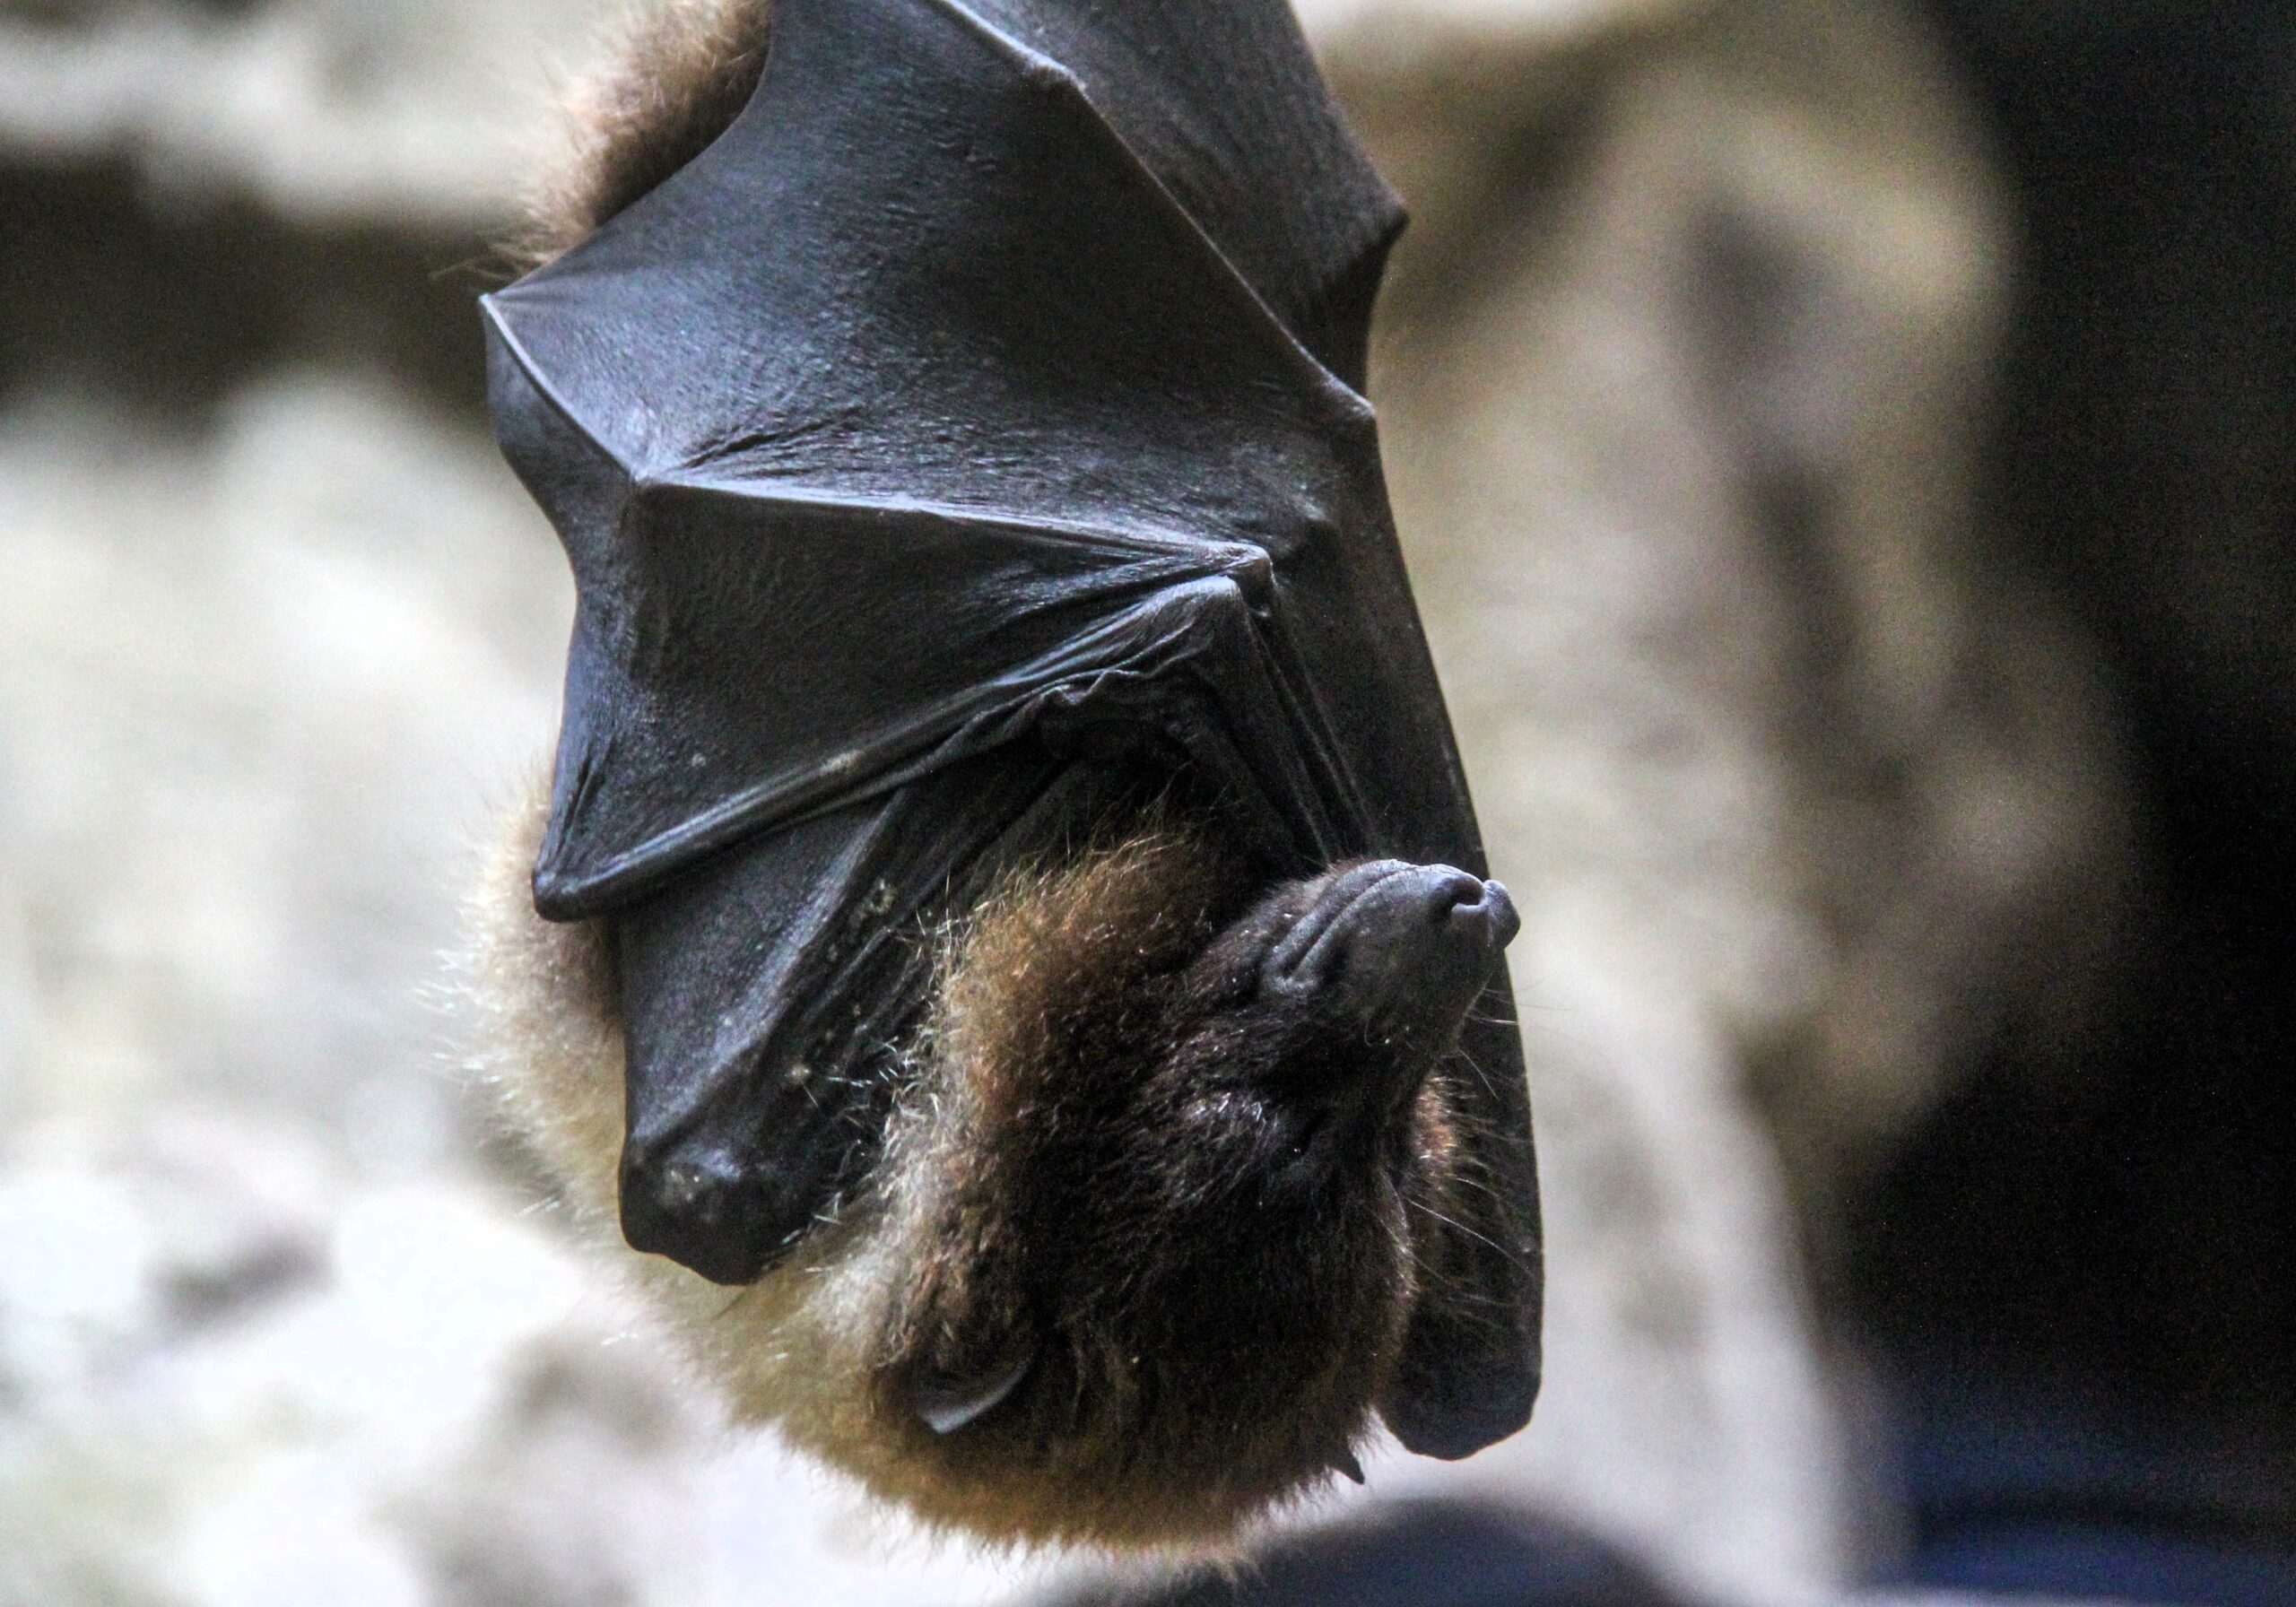 A closeup shot of a sleeping bat wrapped in its wings